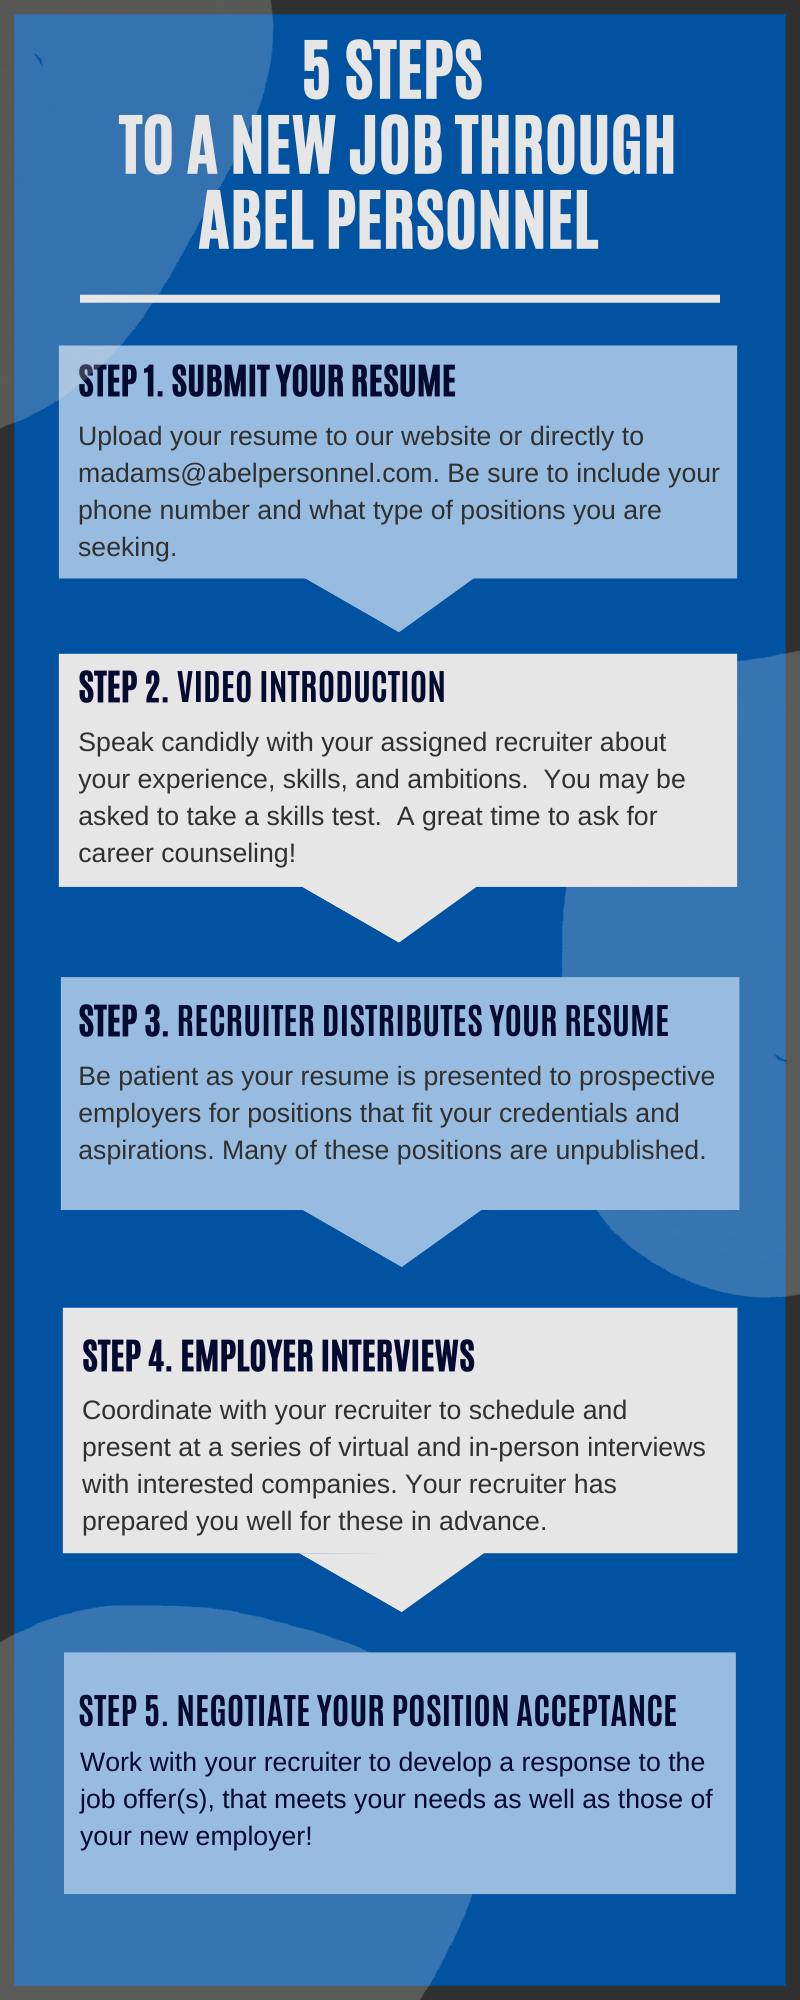 5 Steps to a New Job Through Abel - Infographic